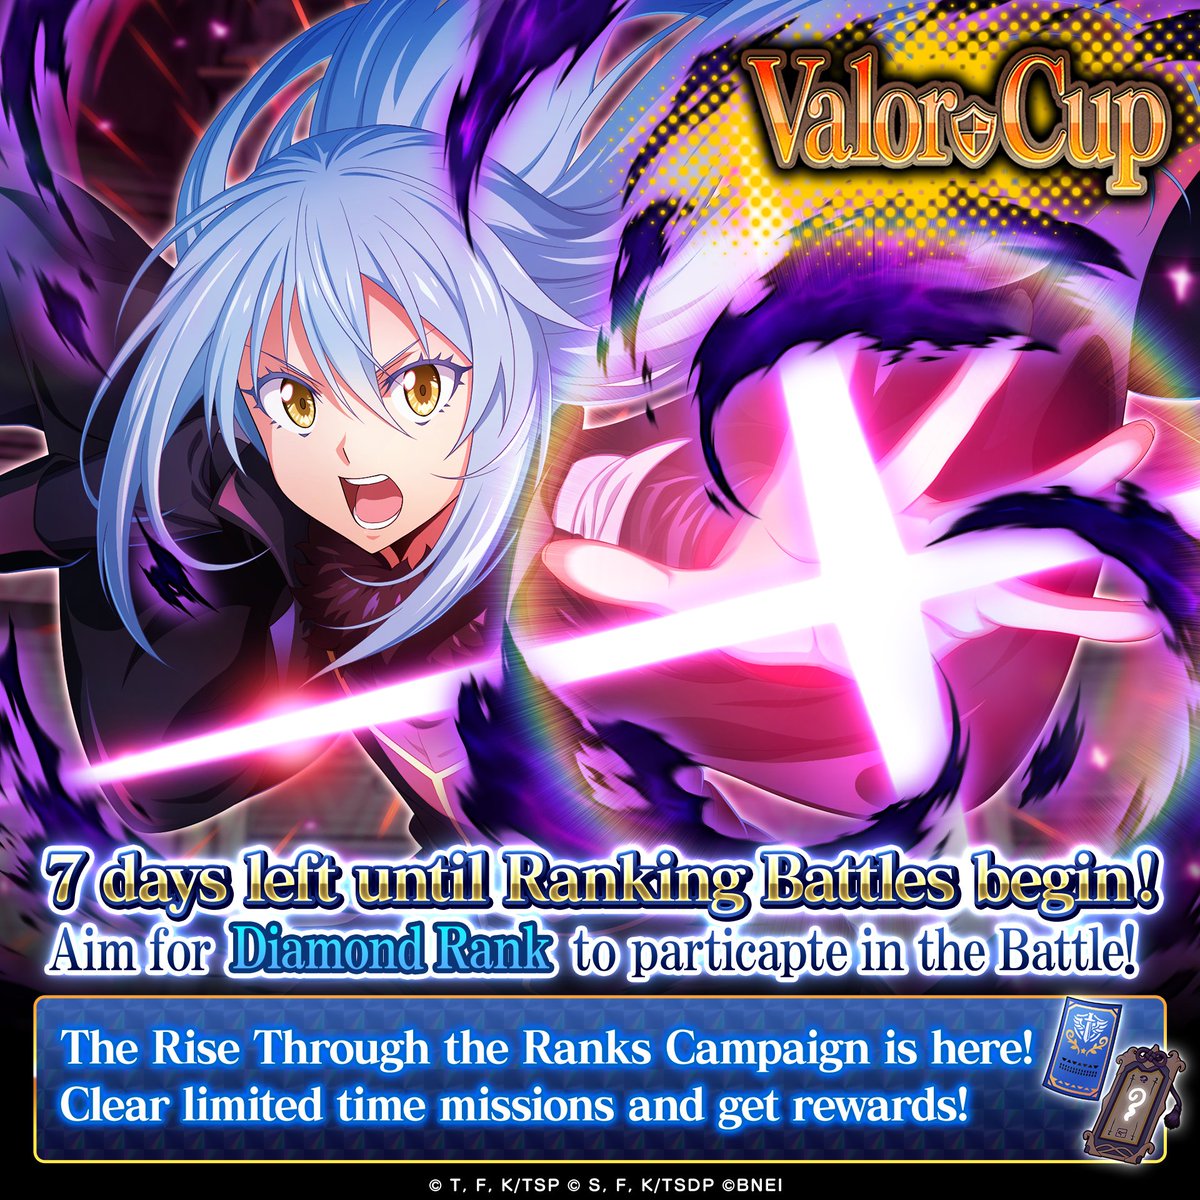 🏆Valor Cup Rise Through the Ranks Campaign🏆

Clear limited time missions to get charms and Valor Cup Tickets, which can be used in the Valor Cup.🎫

#SlimeIM #tensura